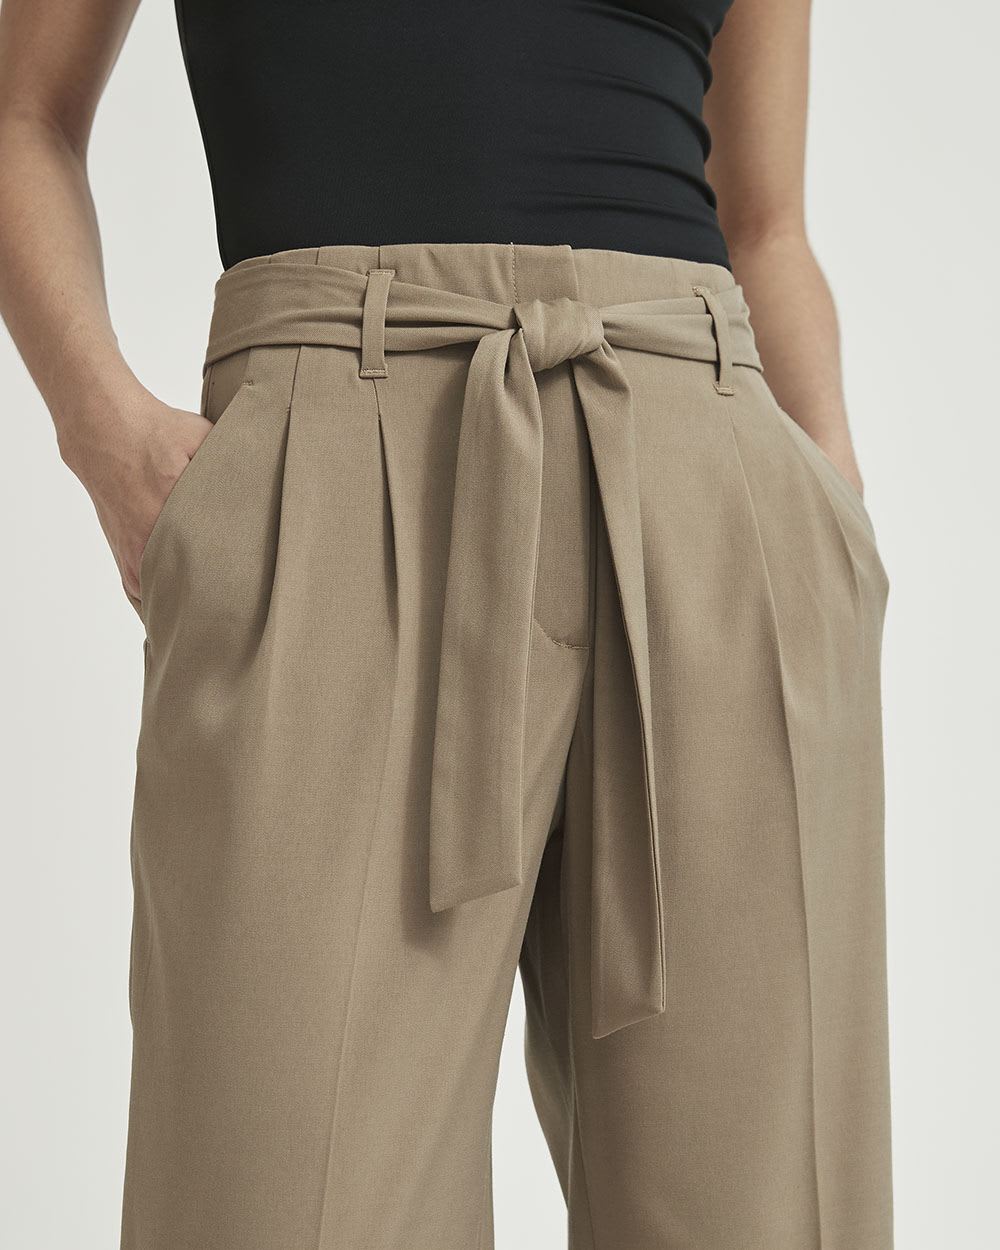 Twill High-Waist Wide Leg Pant with Removable Sash - 33"